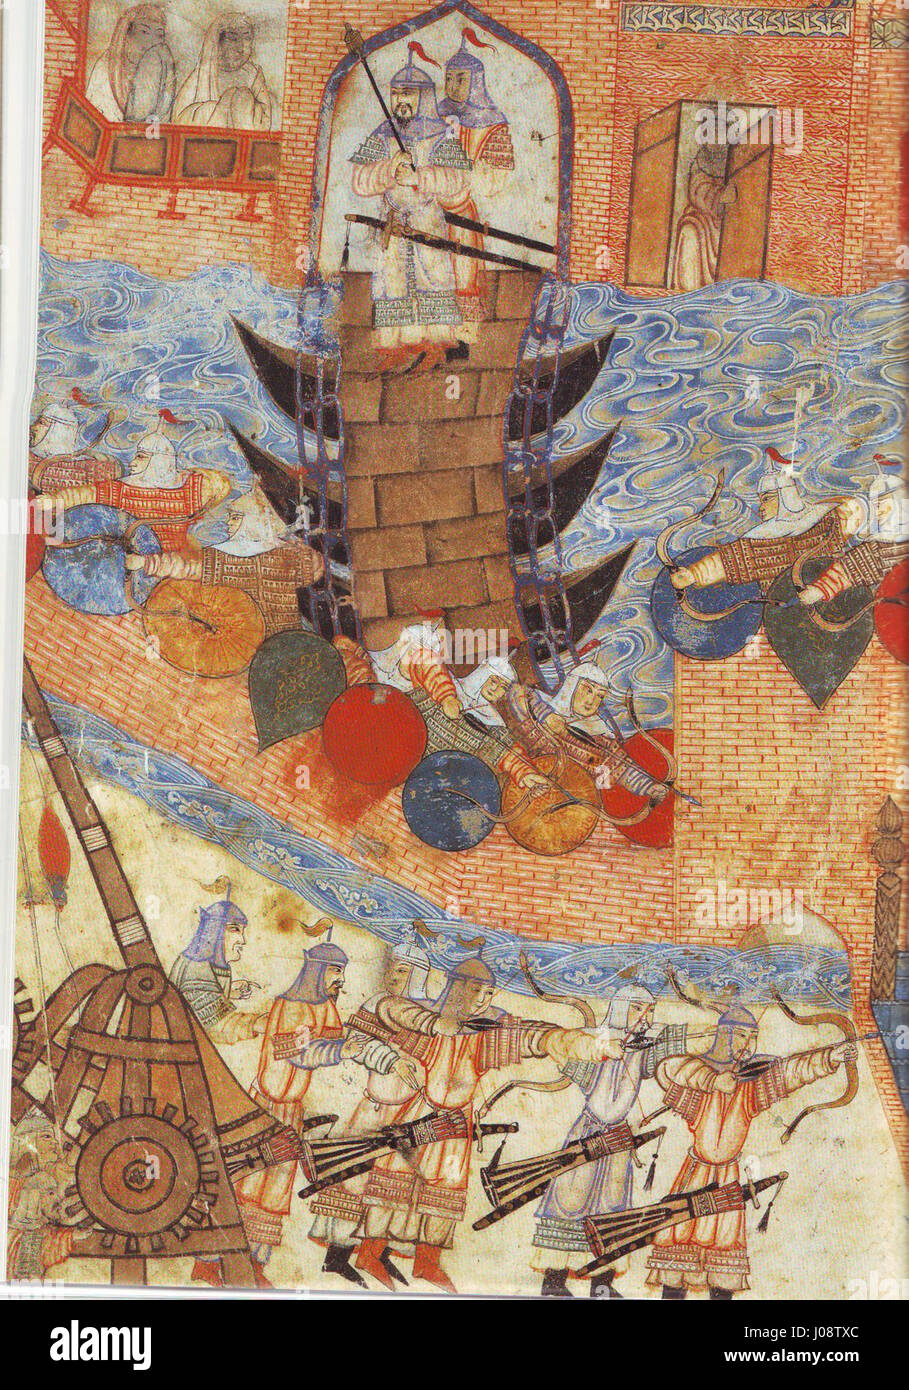 Persian painting of HülegüE28099s army attacking city with siege engine Stock Photo